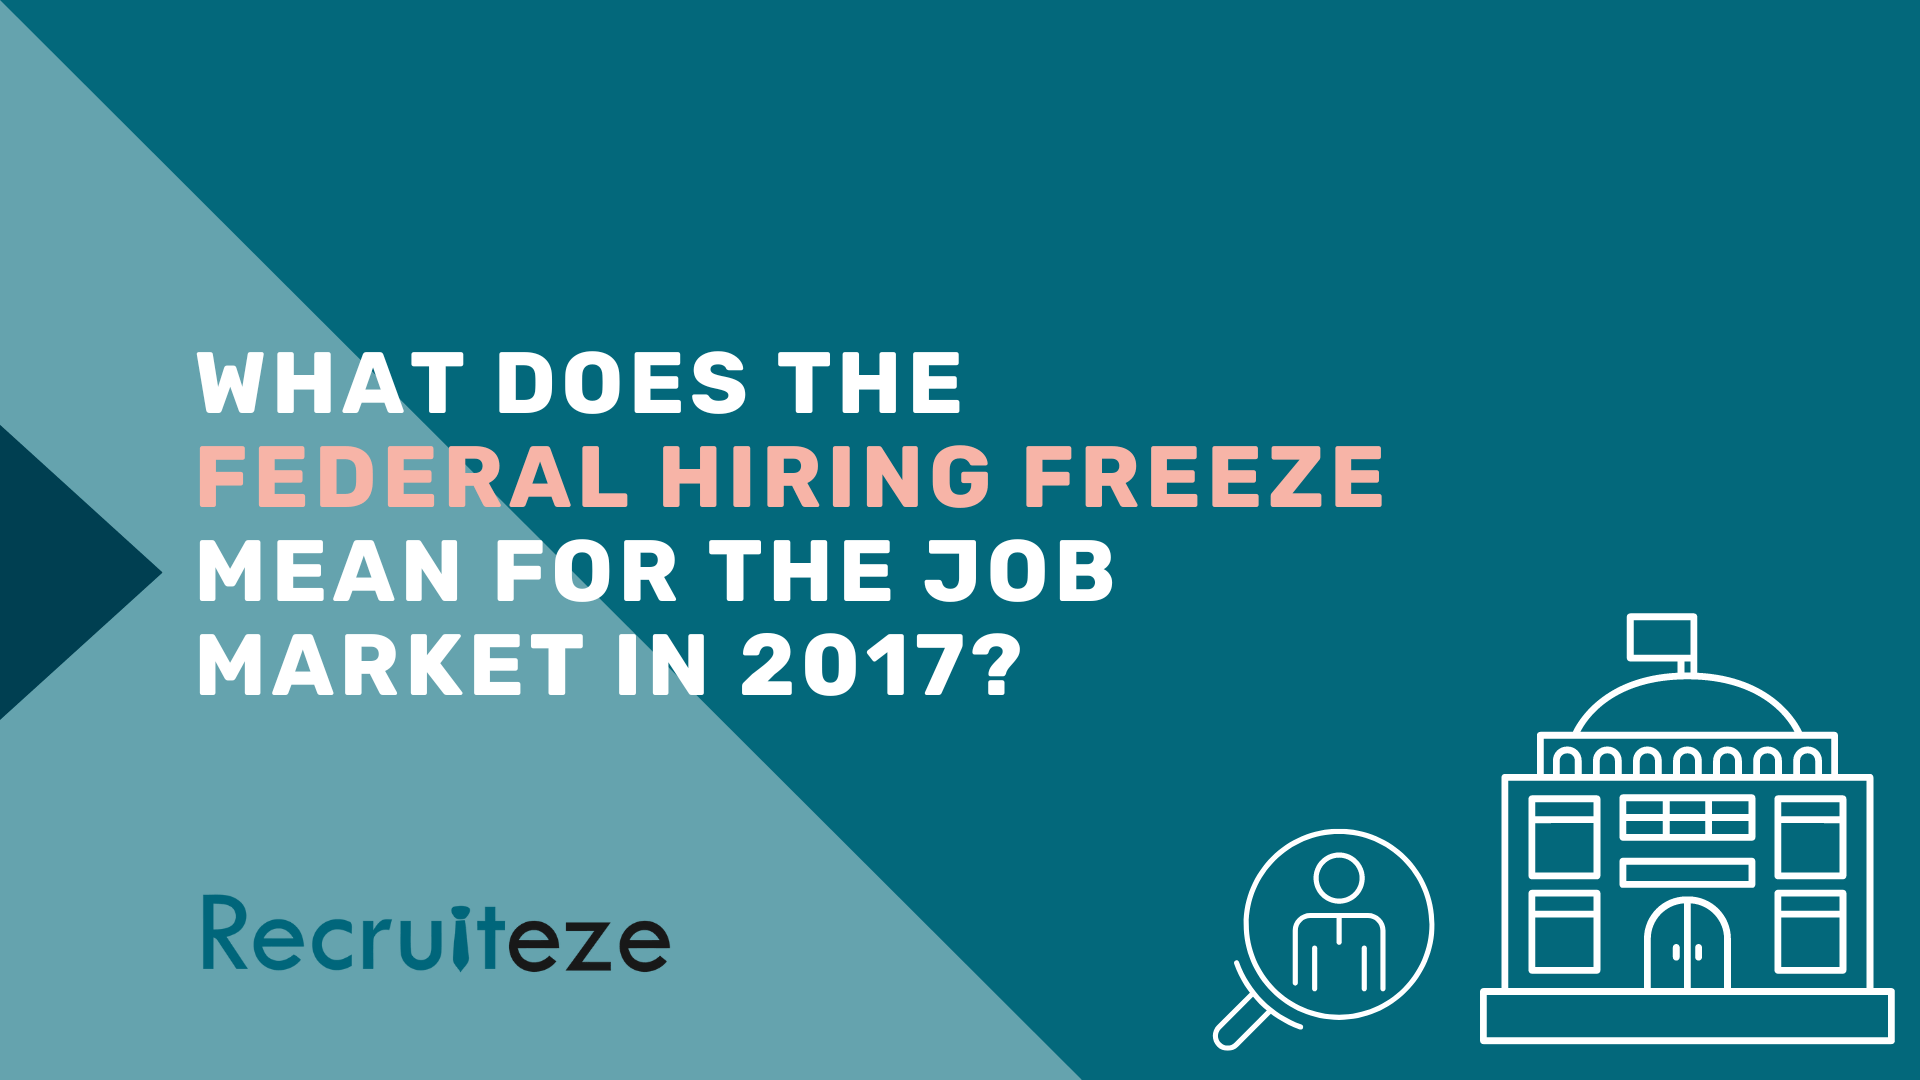 What Does the Federal Hiring Freeze Mean for the Job Market in 2017?